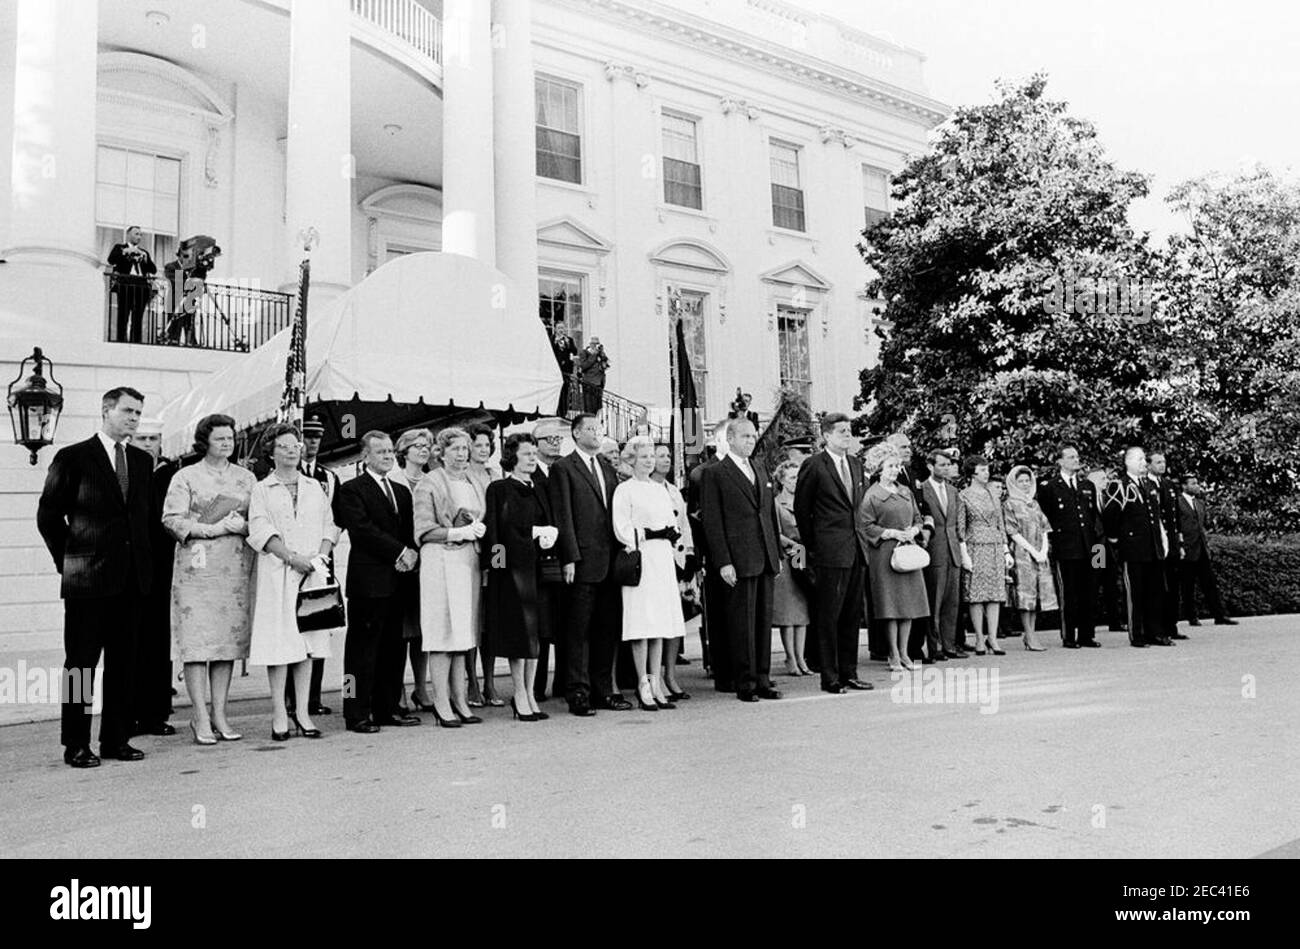 President Kennedy greets recipients of the Congressional Medal of Honor, Annual Military Reception, 6:03PM. President John F. Kennedy and others attend a military reception in honor of recipients of the Congressional Medal of Honor. Left to right: several unidentified persons; Margaret McNamara (wearing black coat), wife of Robert S. McNamara, Secretary of Defense; Secretary of the Navy, Fred Korth (in back); Secretary McNamara; unidentified man (in back); Madelin T. Gilpatric, wife of Roswell L. Gilpatric, Deputy Secretary of Defense; Phyllis Chess Ellsworth, wife of C. Douglas Dillon, Secret Stock Photo